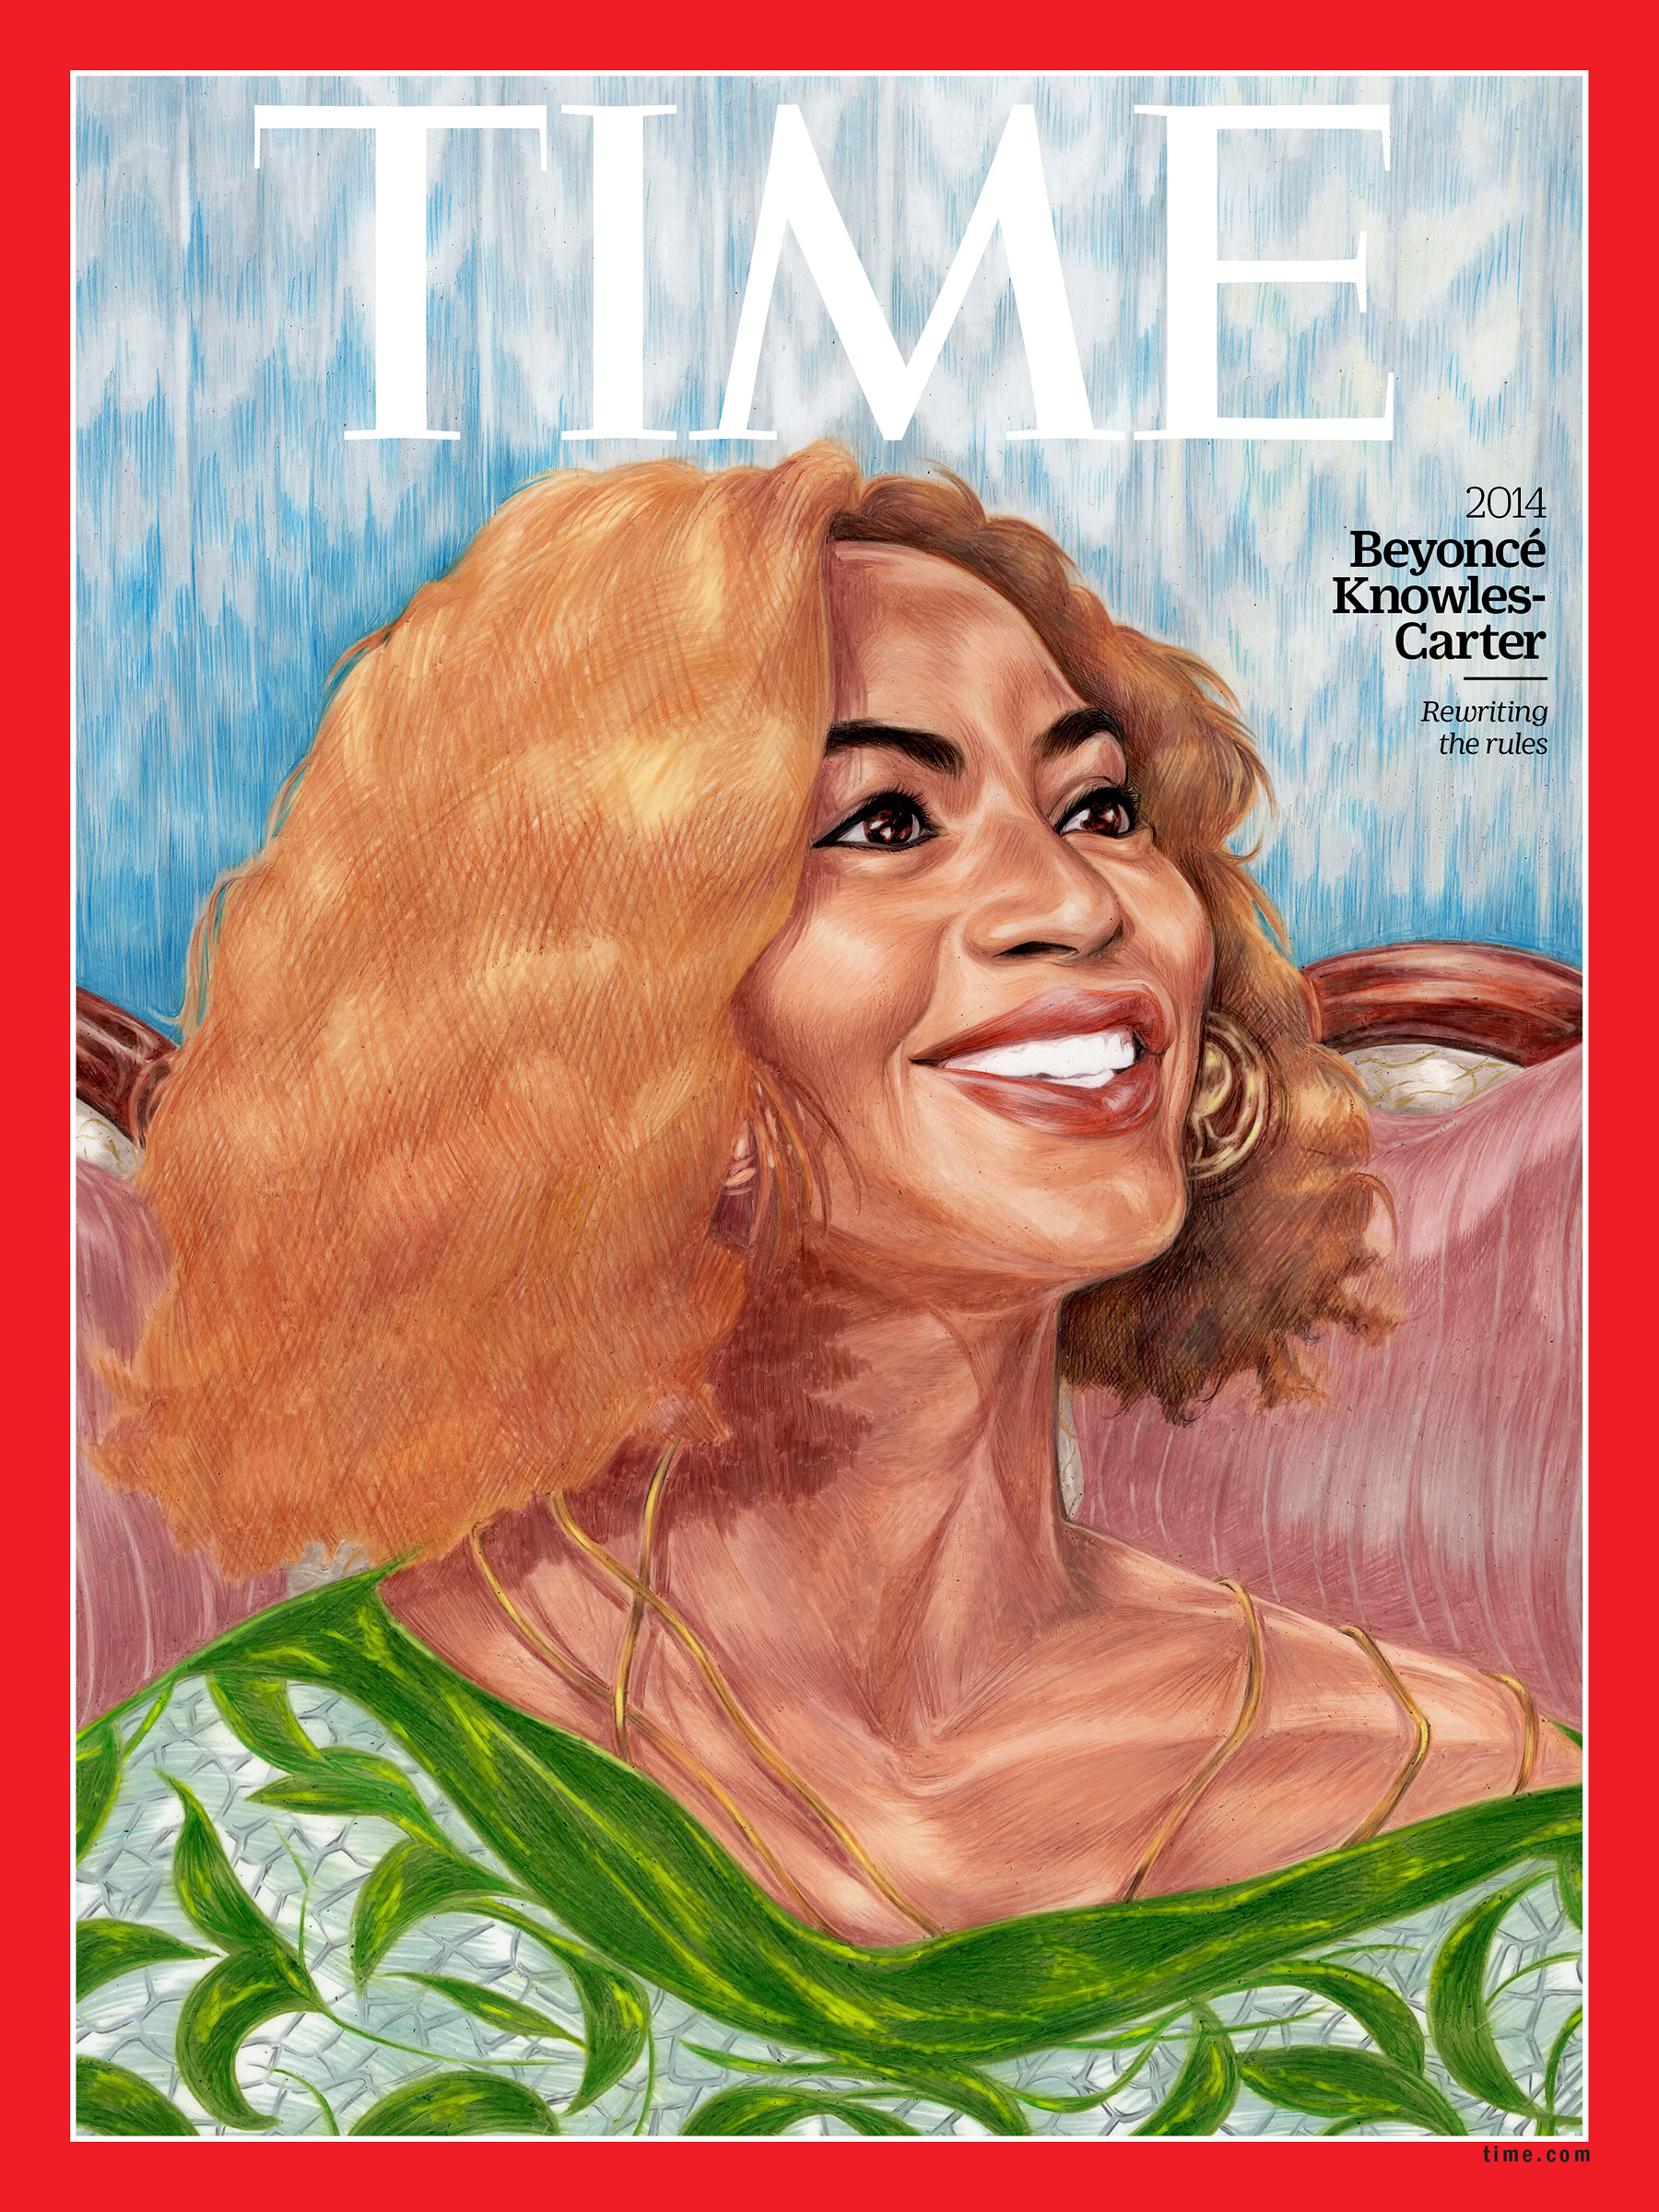 <a href="https://fineartamerica.com/featured/beyonce-knowles-carter-2014-time.html"><strong>Buy the cover art→</strong></a> (Painting by Toyin Ojih Odutola for TIME)